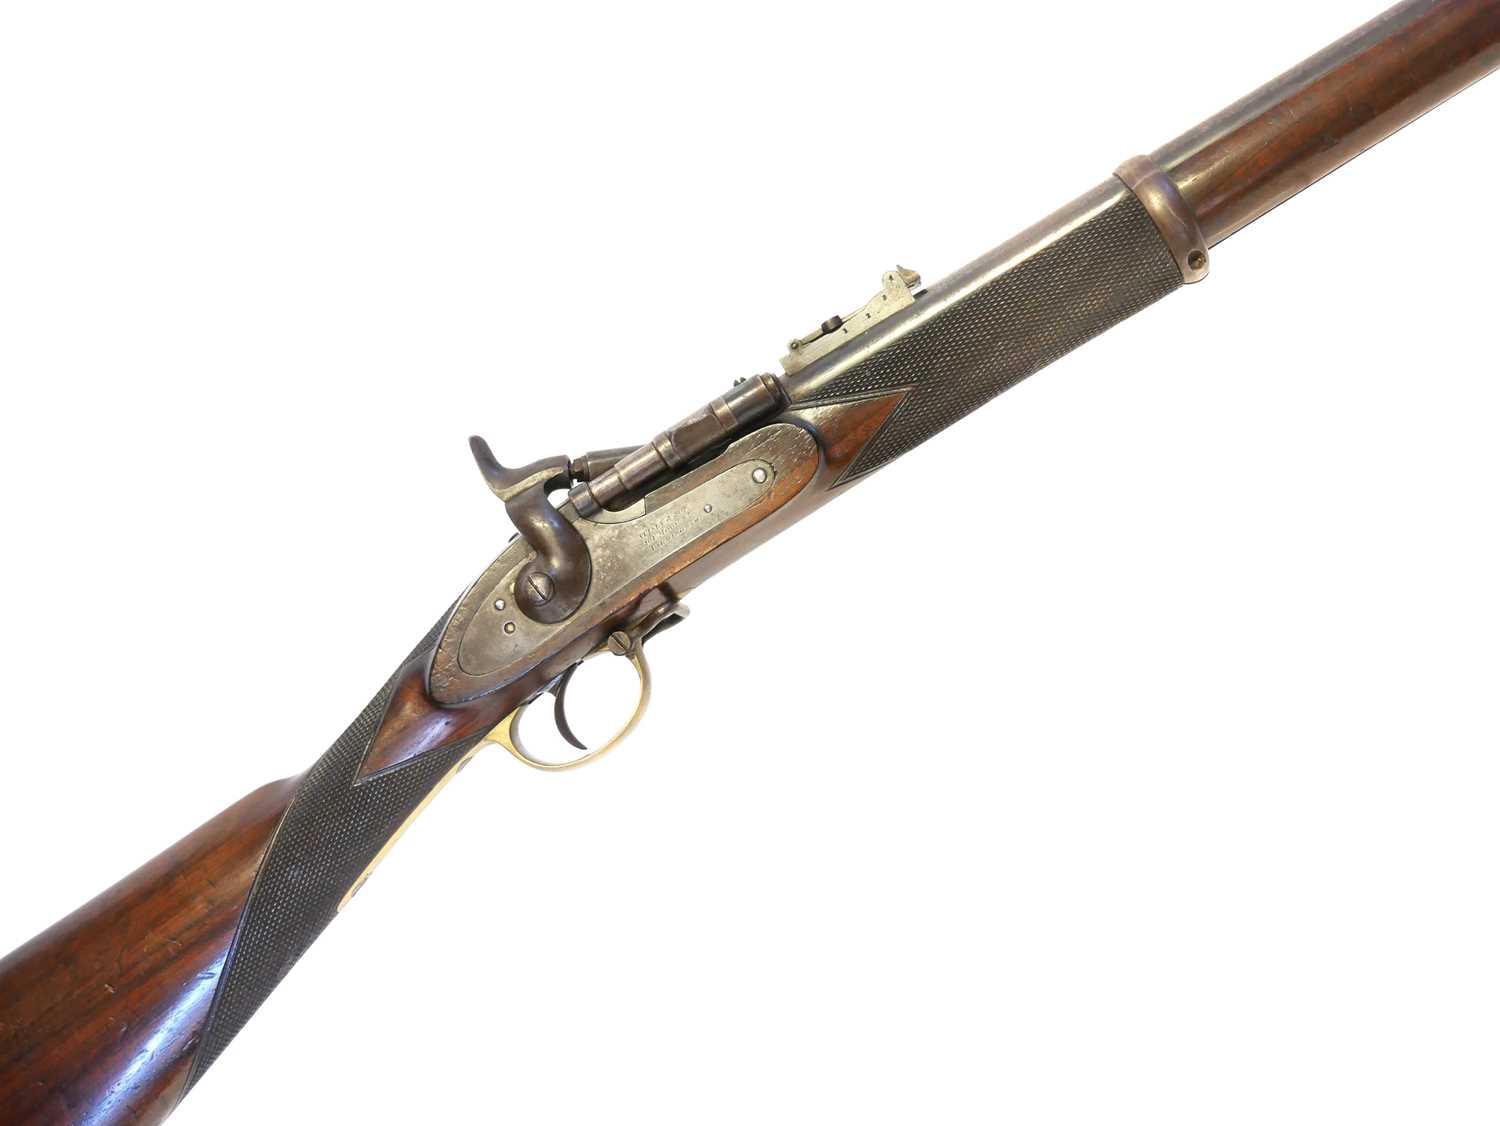 Lot 56 - Volunteer .577 three band Snider rifle by Velsey and Son